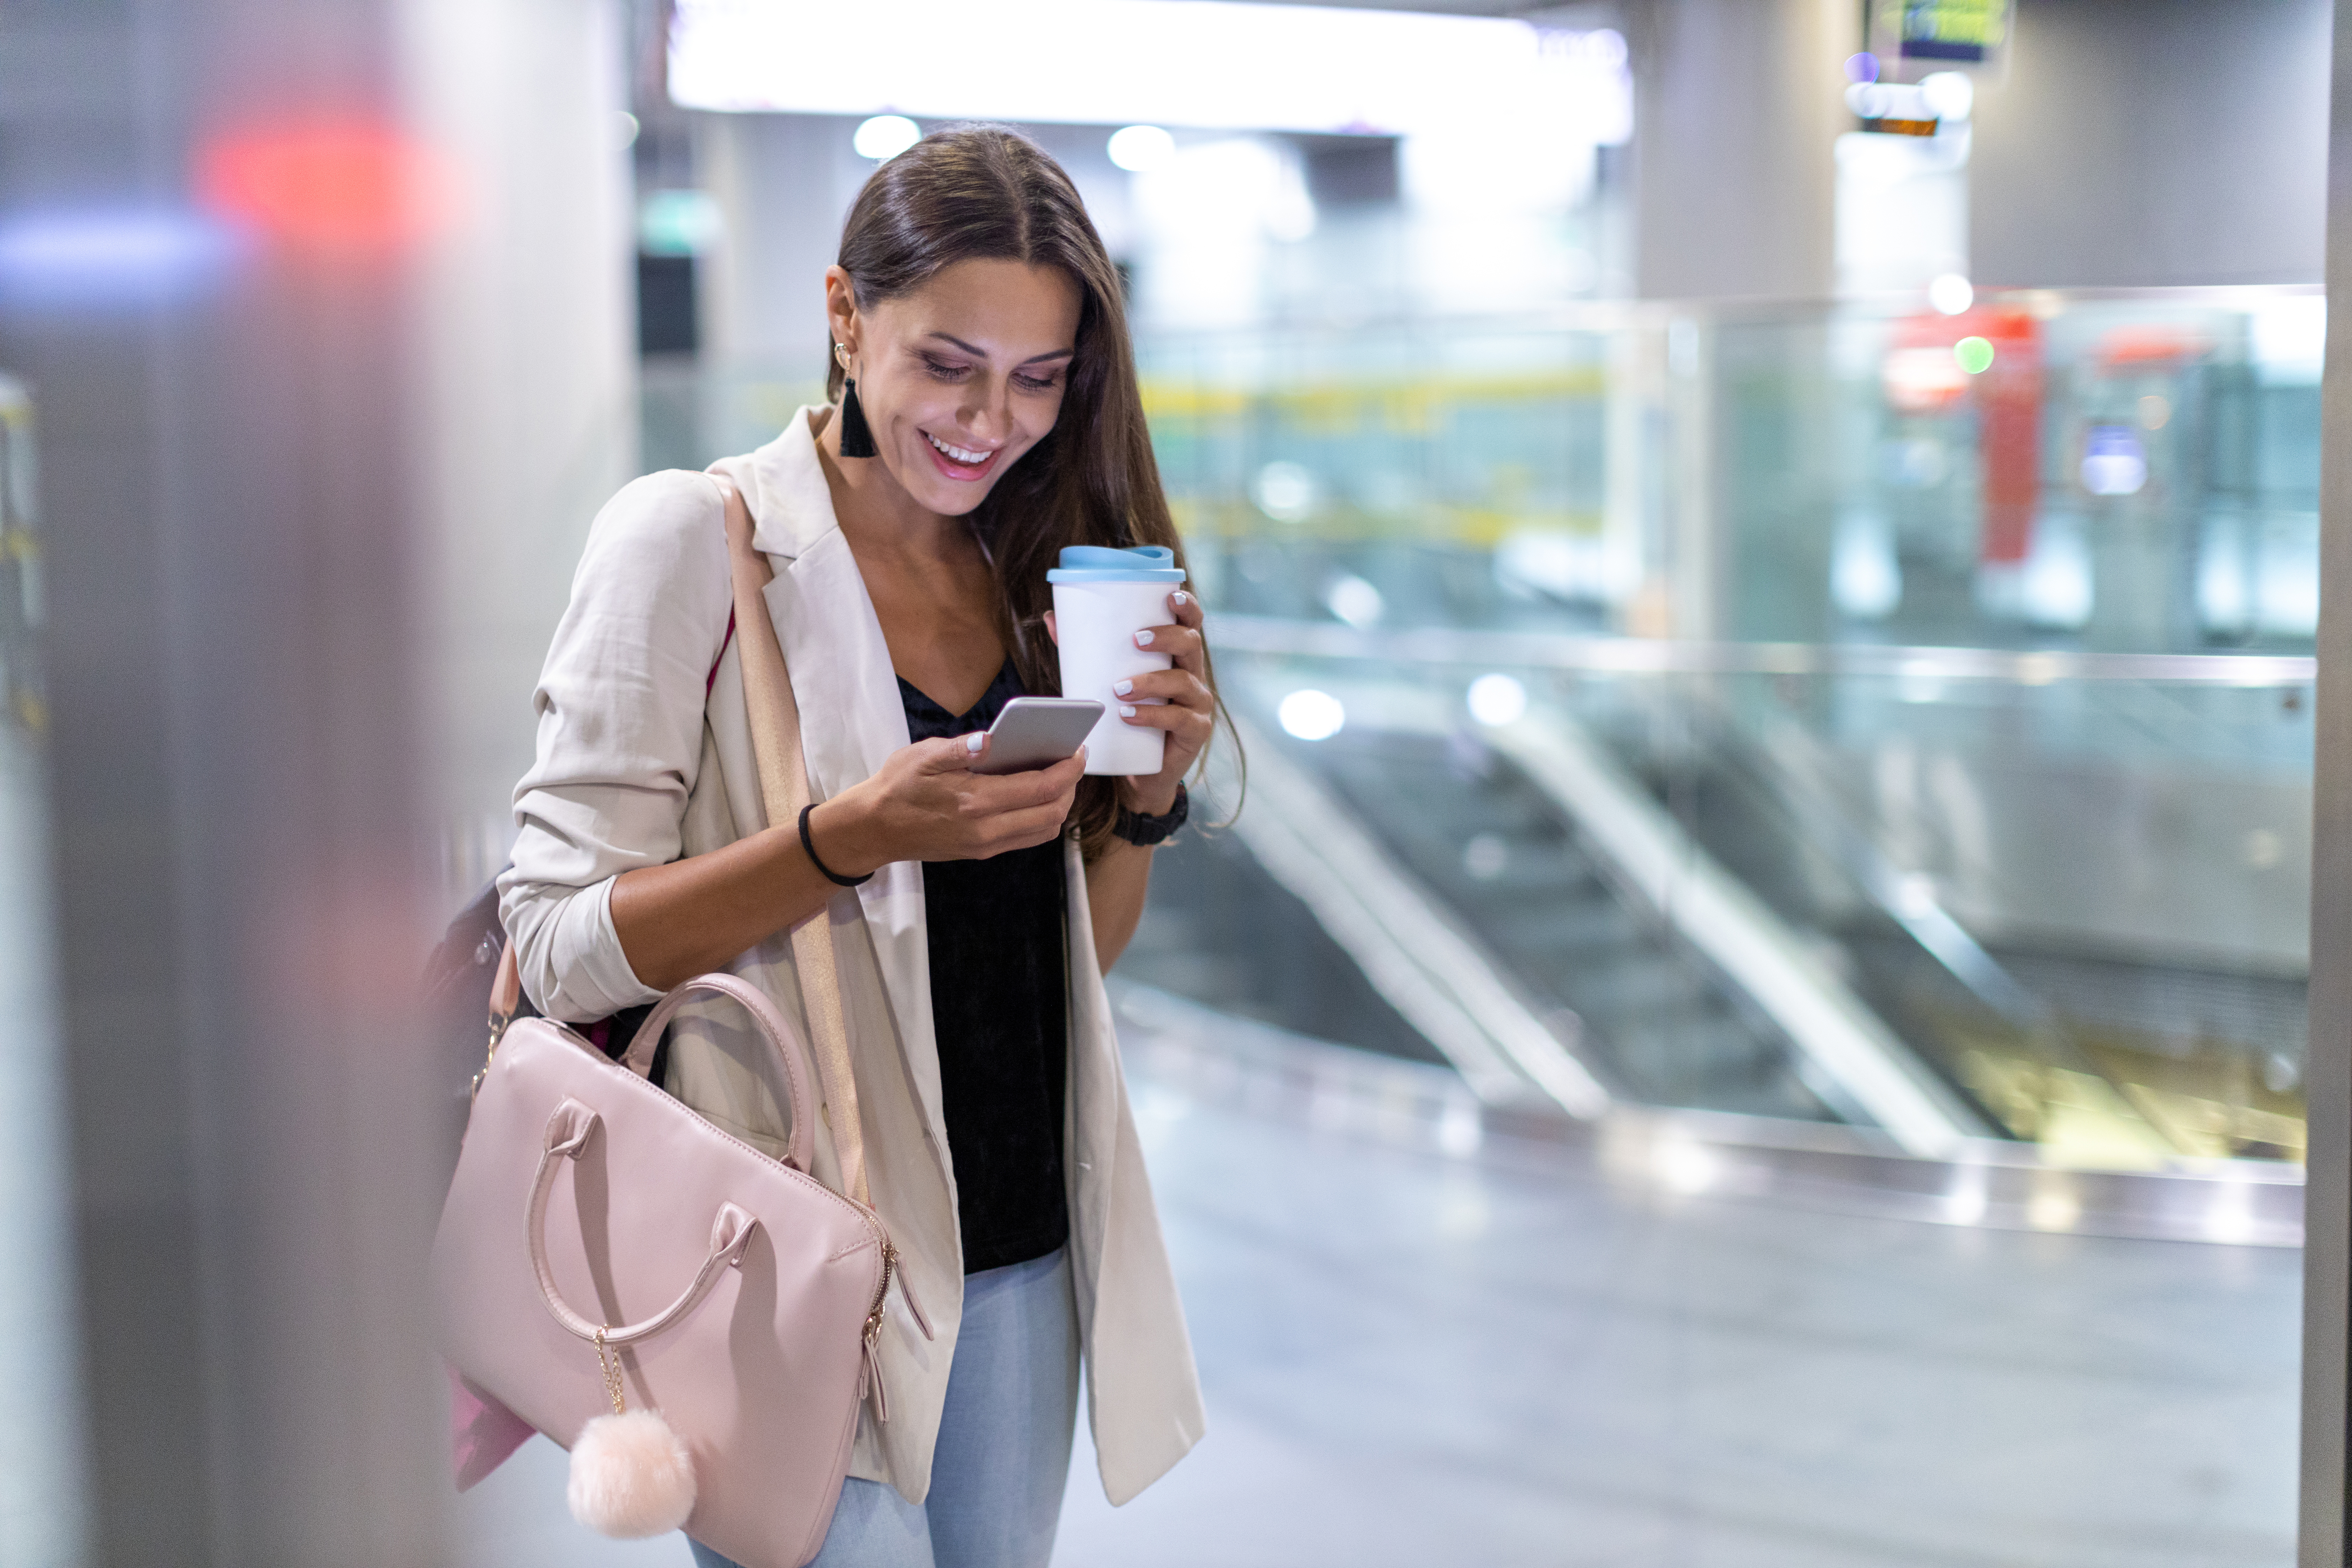 Young woman with smartphone and coffee in the airport.